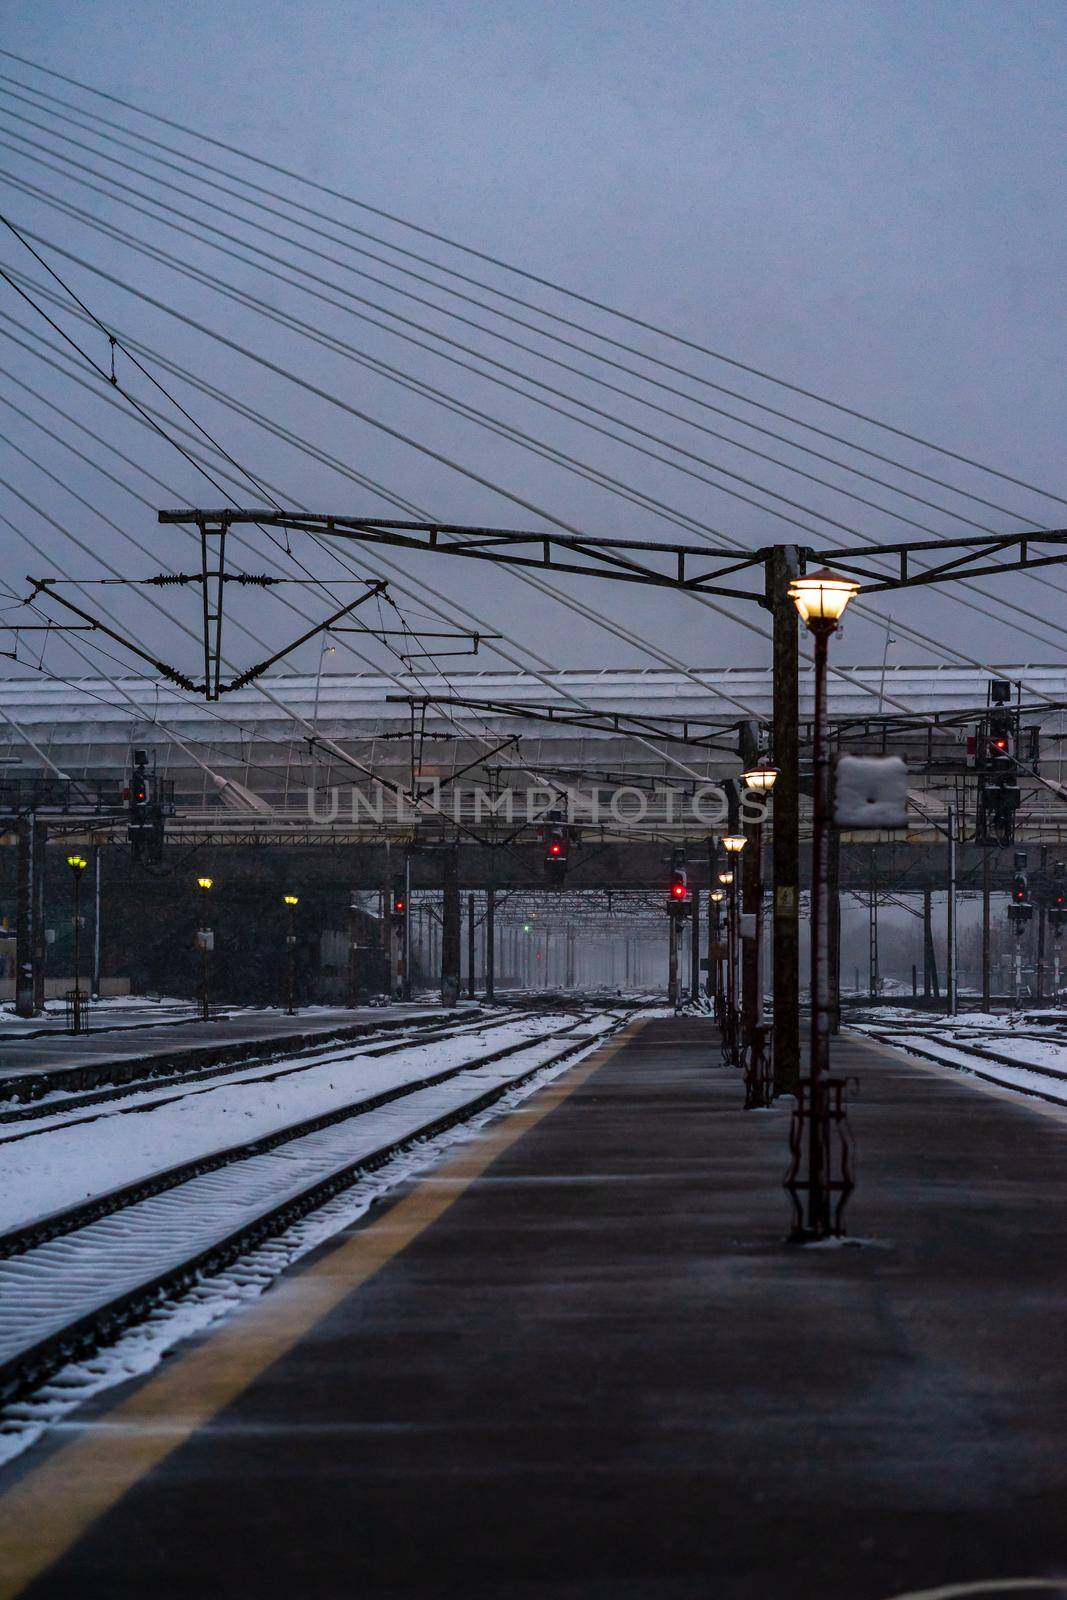 Northern Railway Station (Gara de Nord) during a cold and snowy day in Bucharest, Romania, 2021 by vladispas